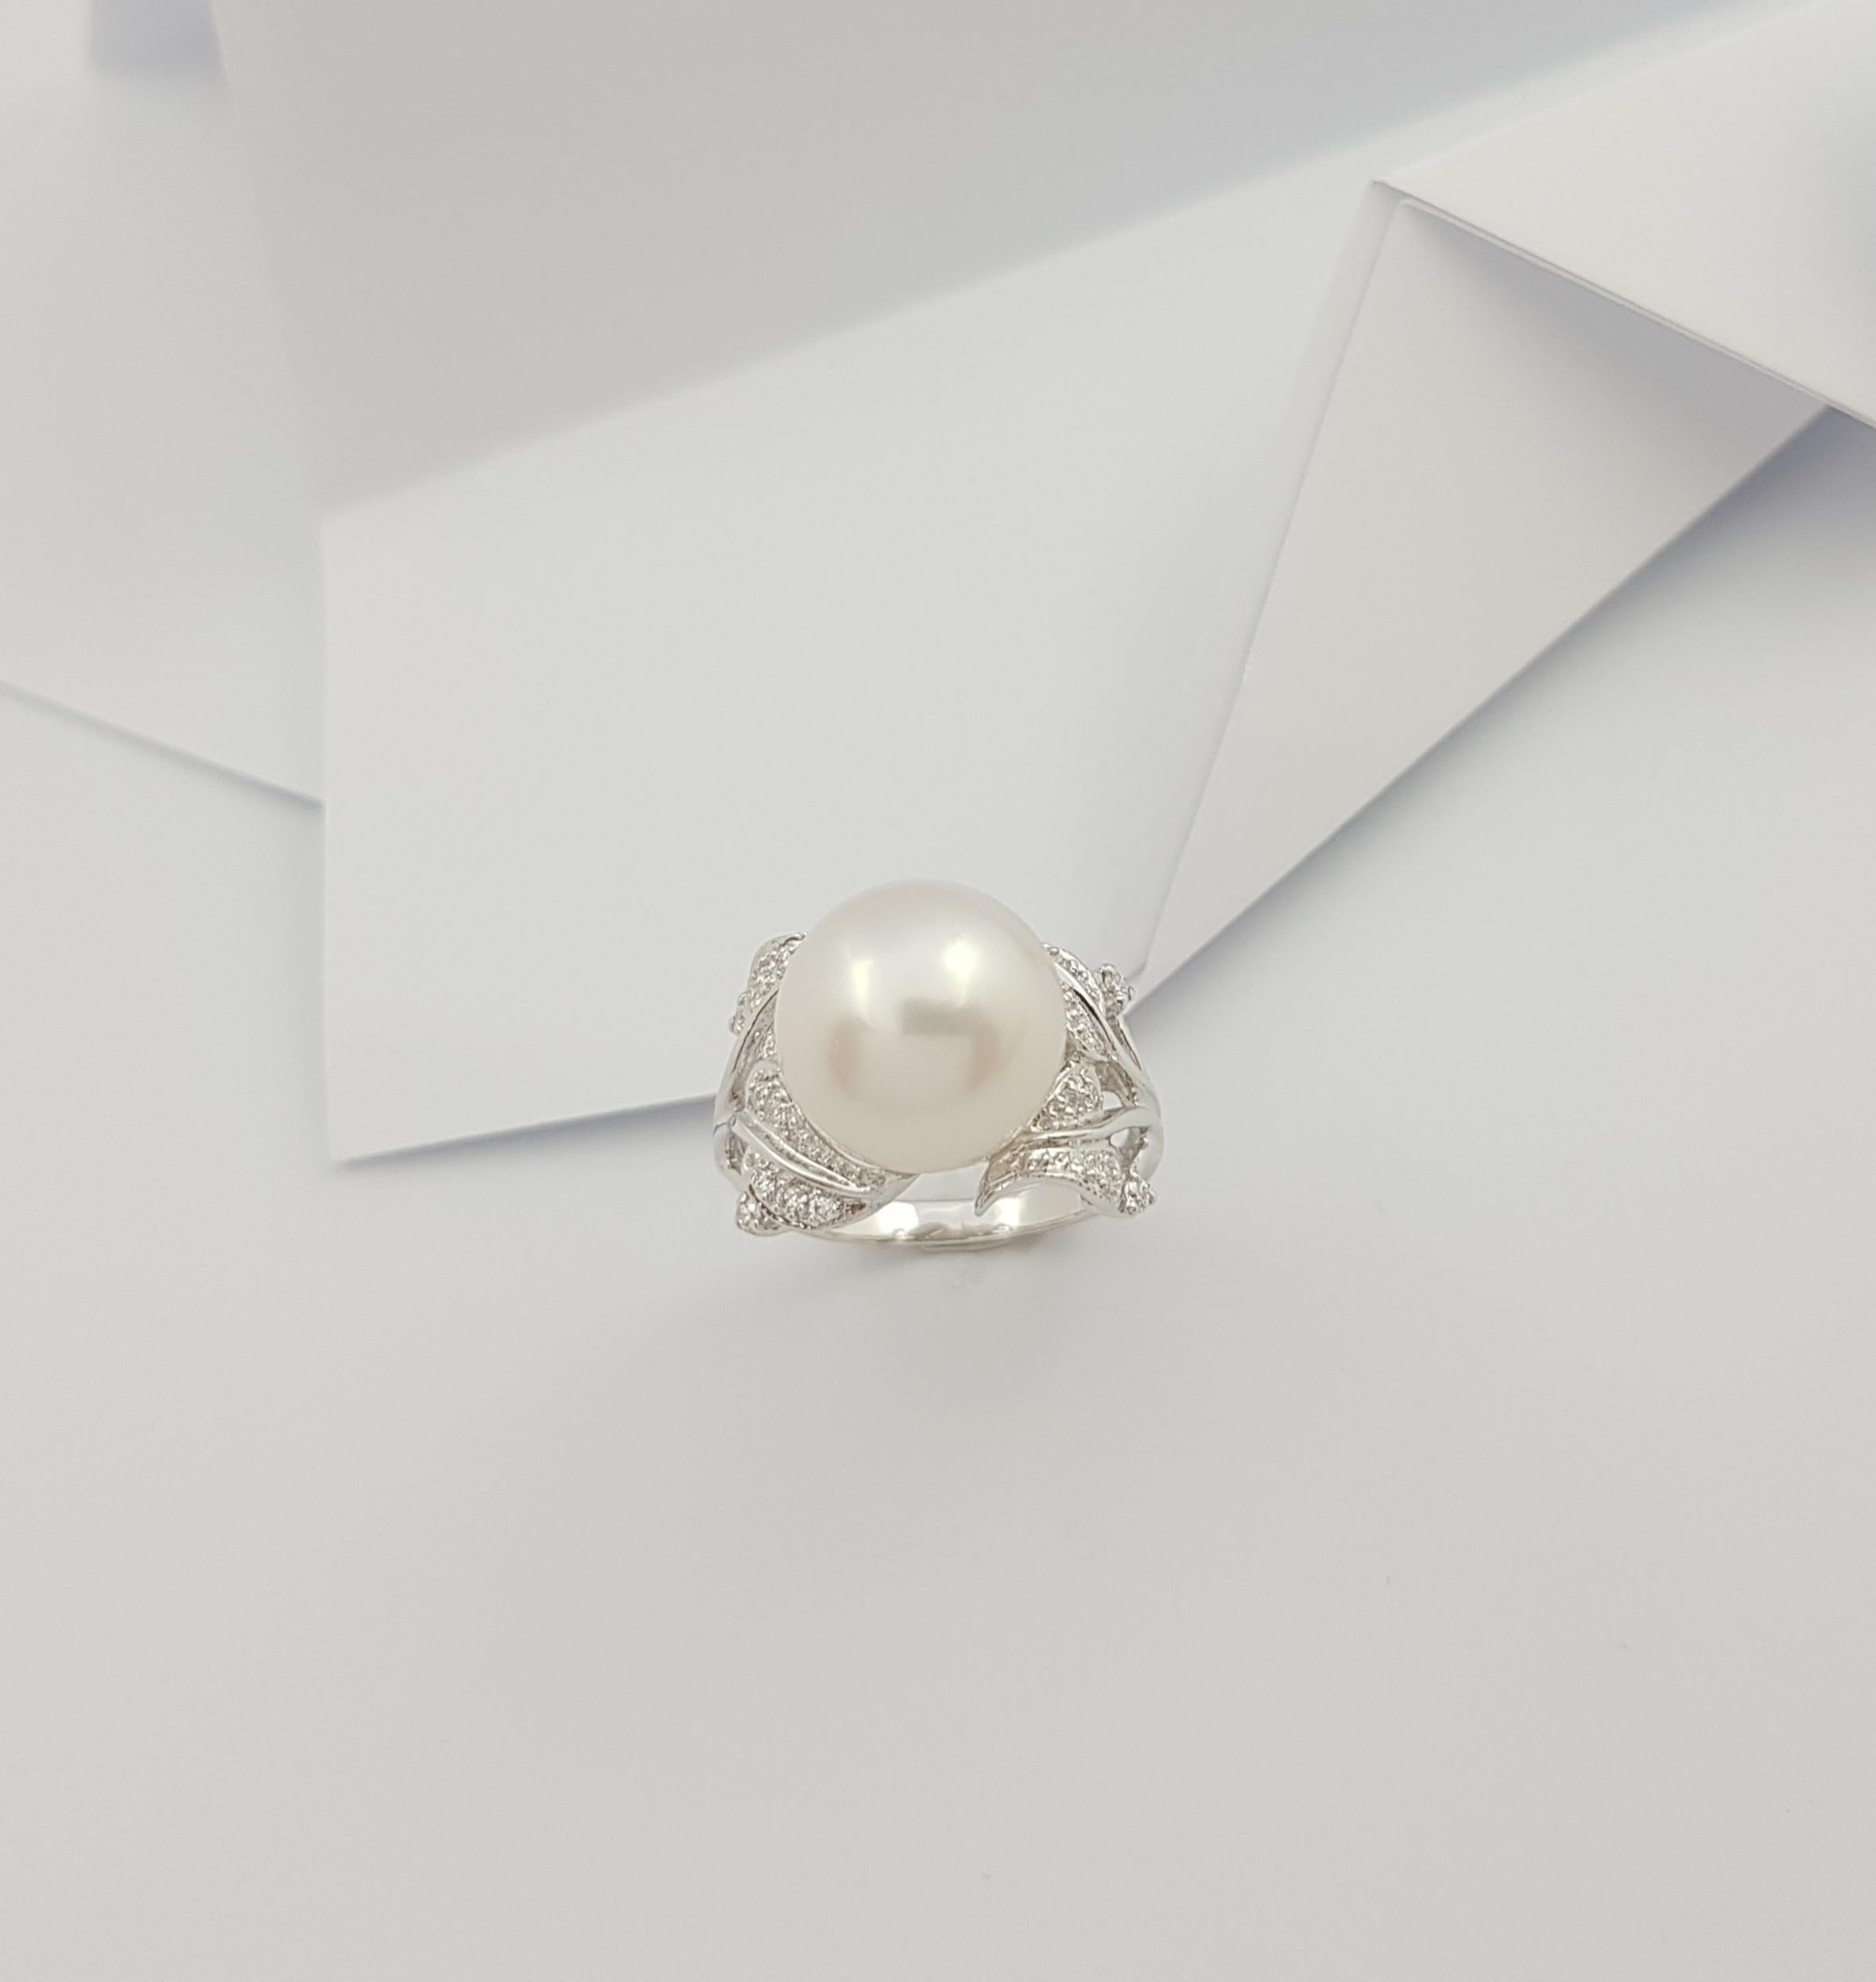  Pearl with Diamond  Ring set in 18 Karat White Gold Settings For Sale 3